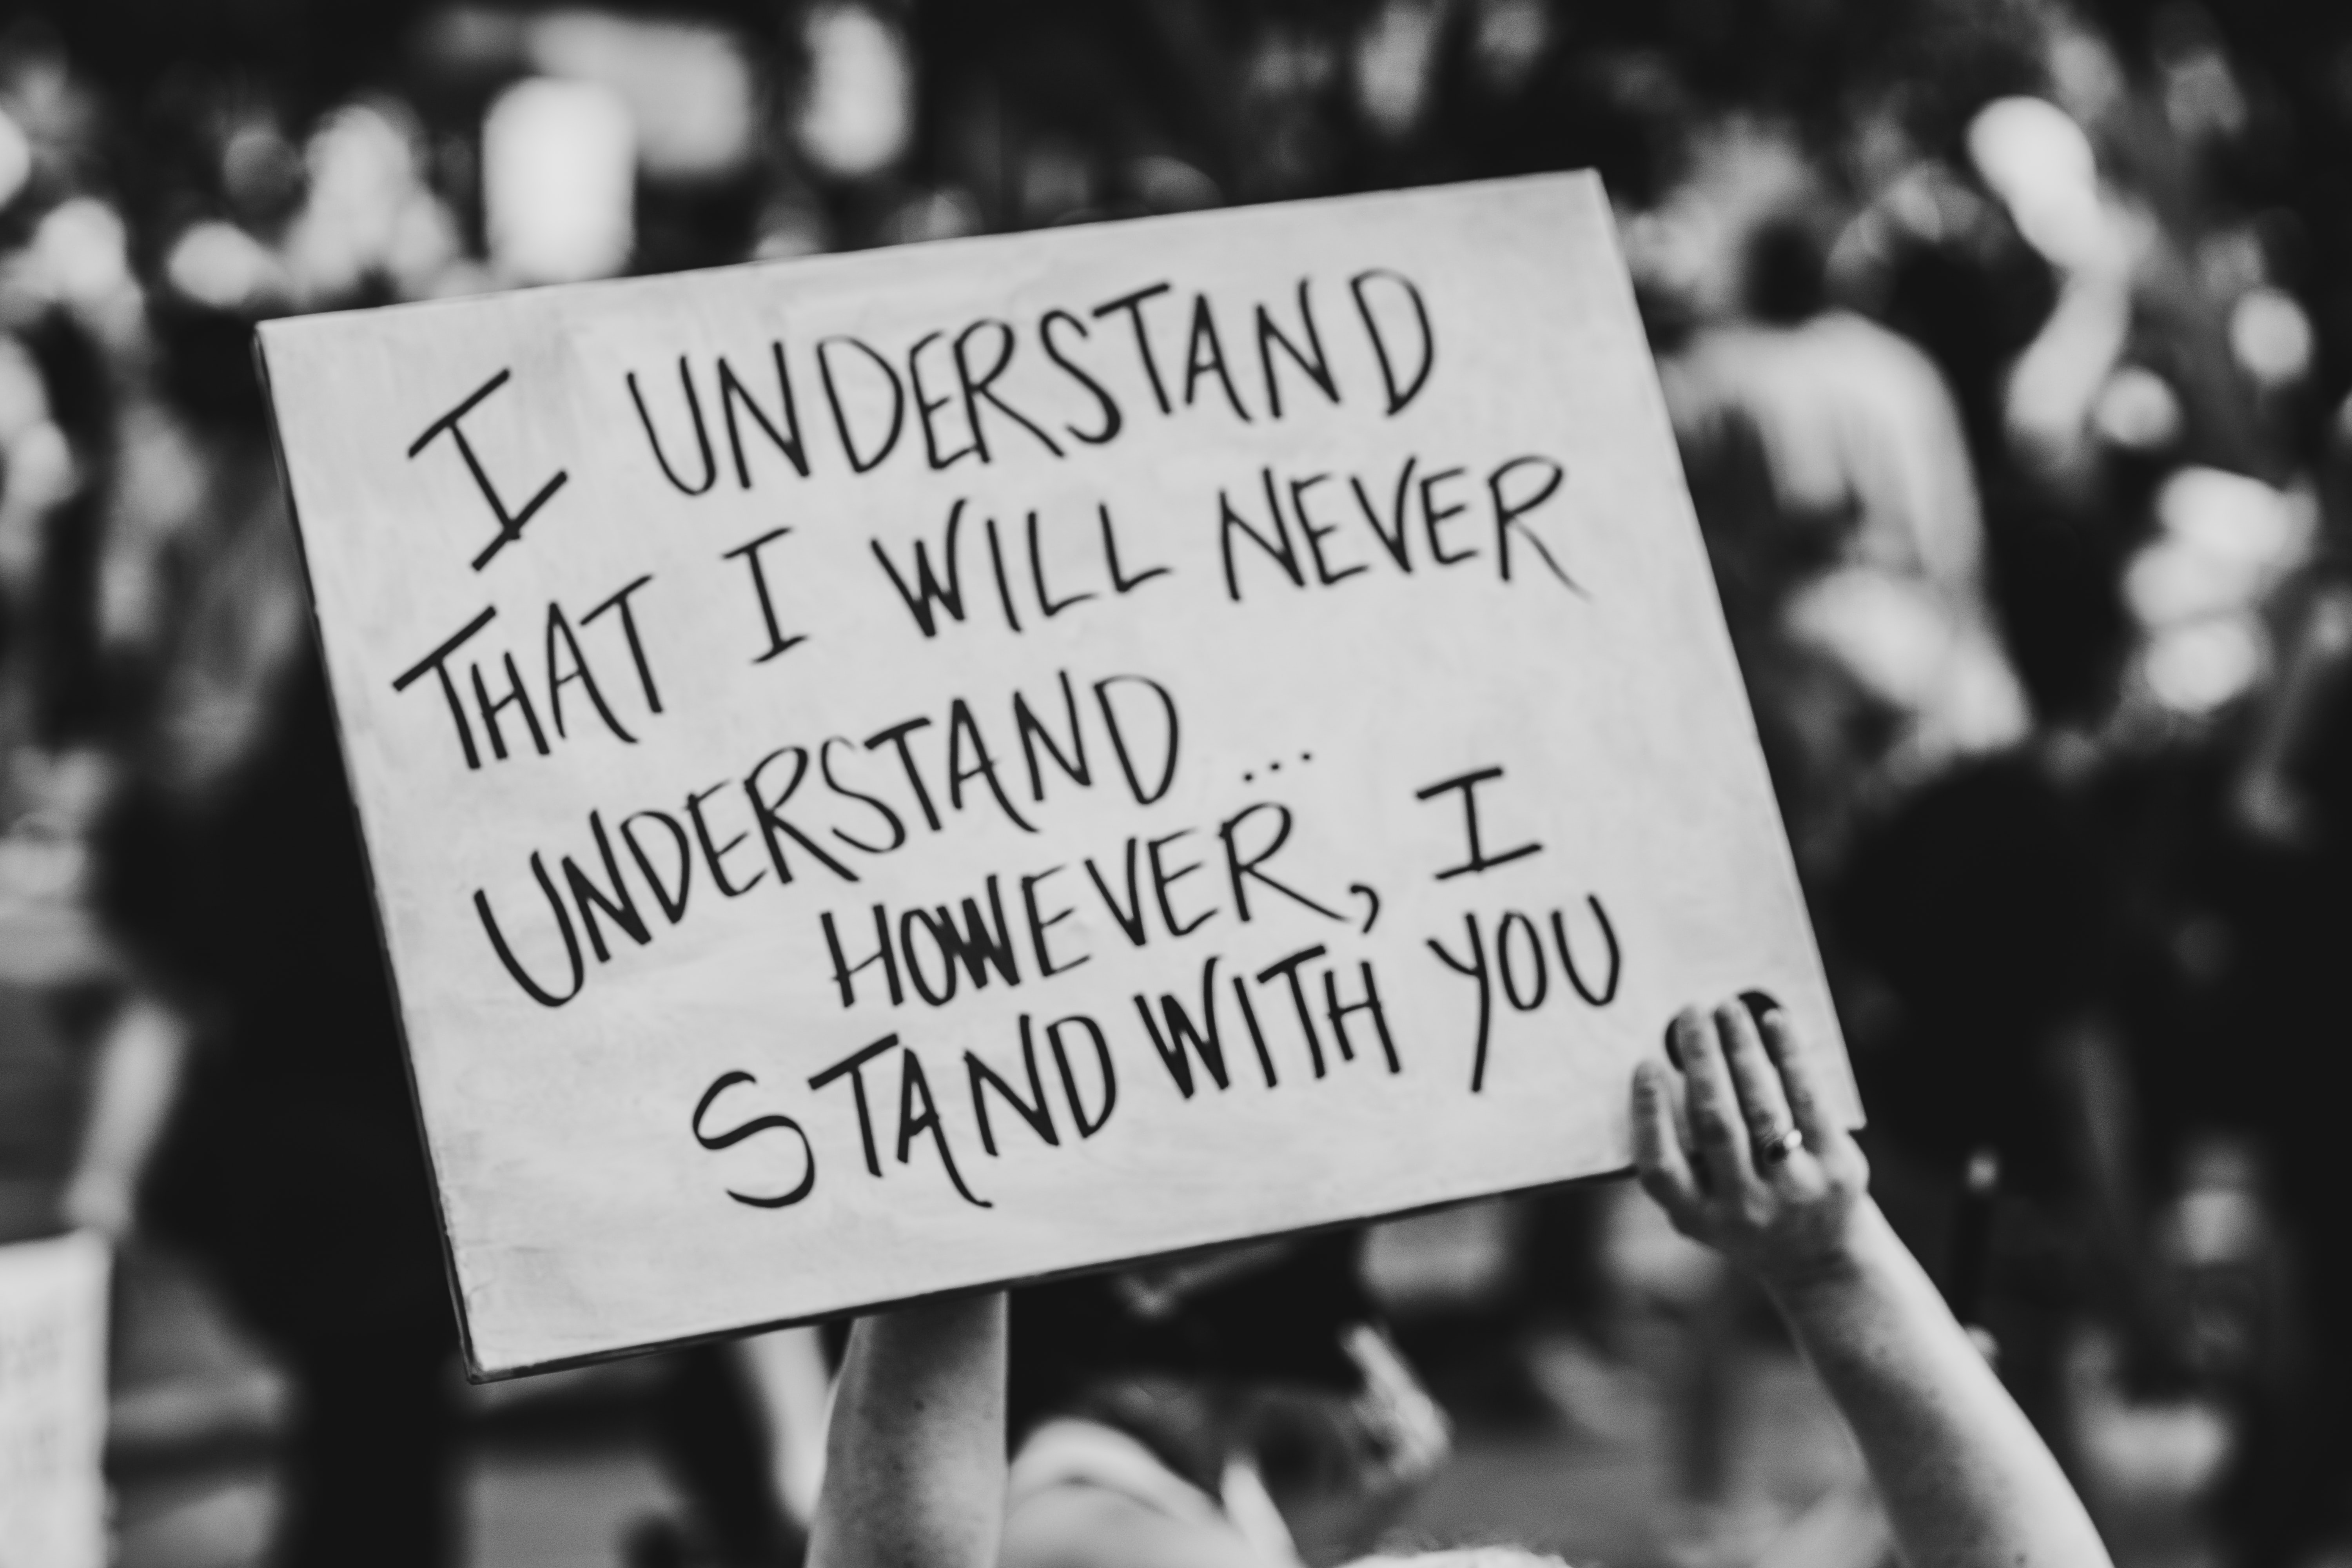 A placard that reads "I understand That I will never understand... However, I will stand with you"